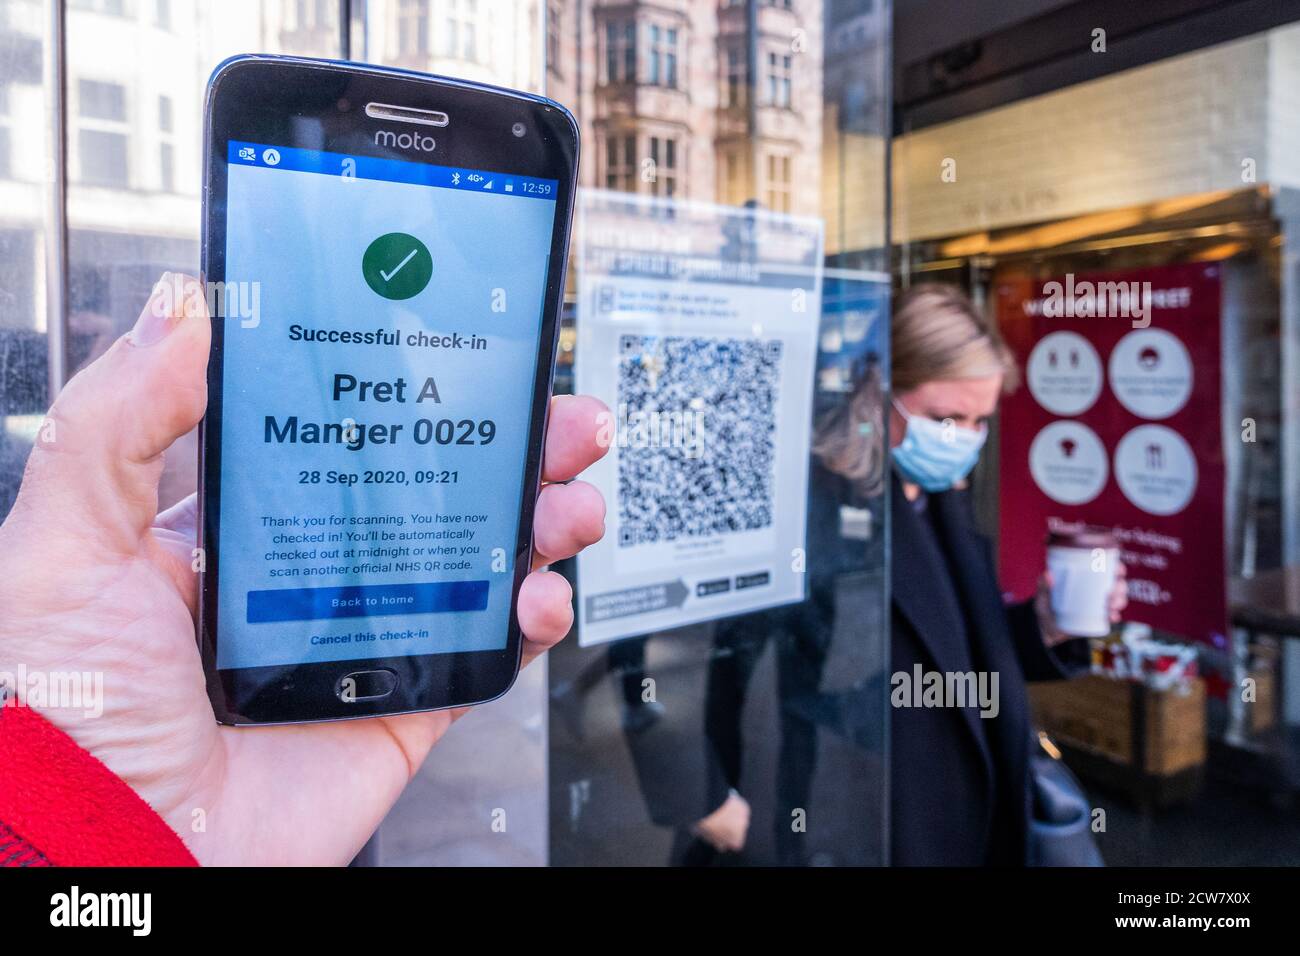 London, UK. 28th Sep, 2020. Checking in using the NHS track and trace app at Pret A Manger as the Coronavirus Lockdown restrictions increase. Credit: Guy Bell/Alamy Live News Stock Photo